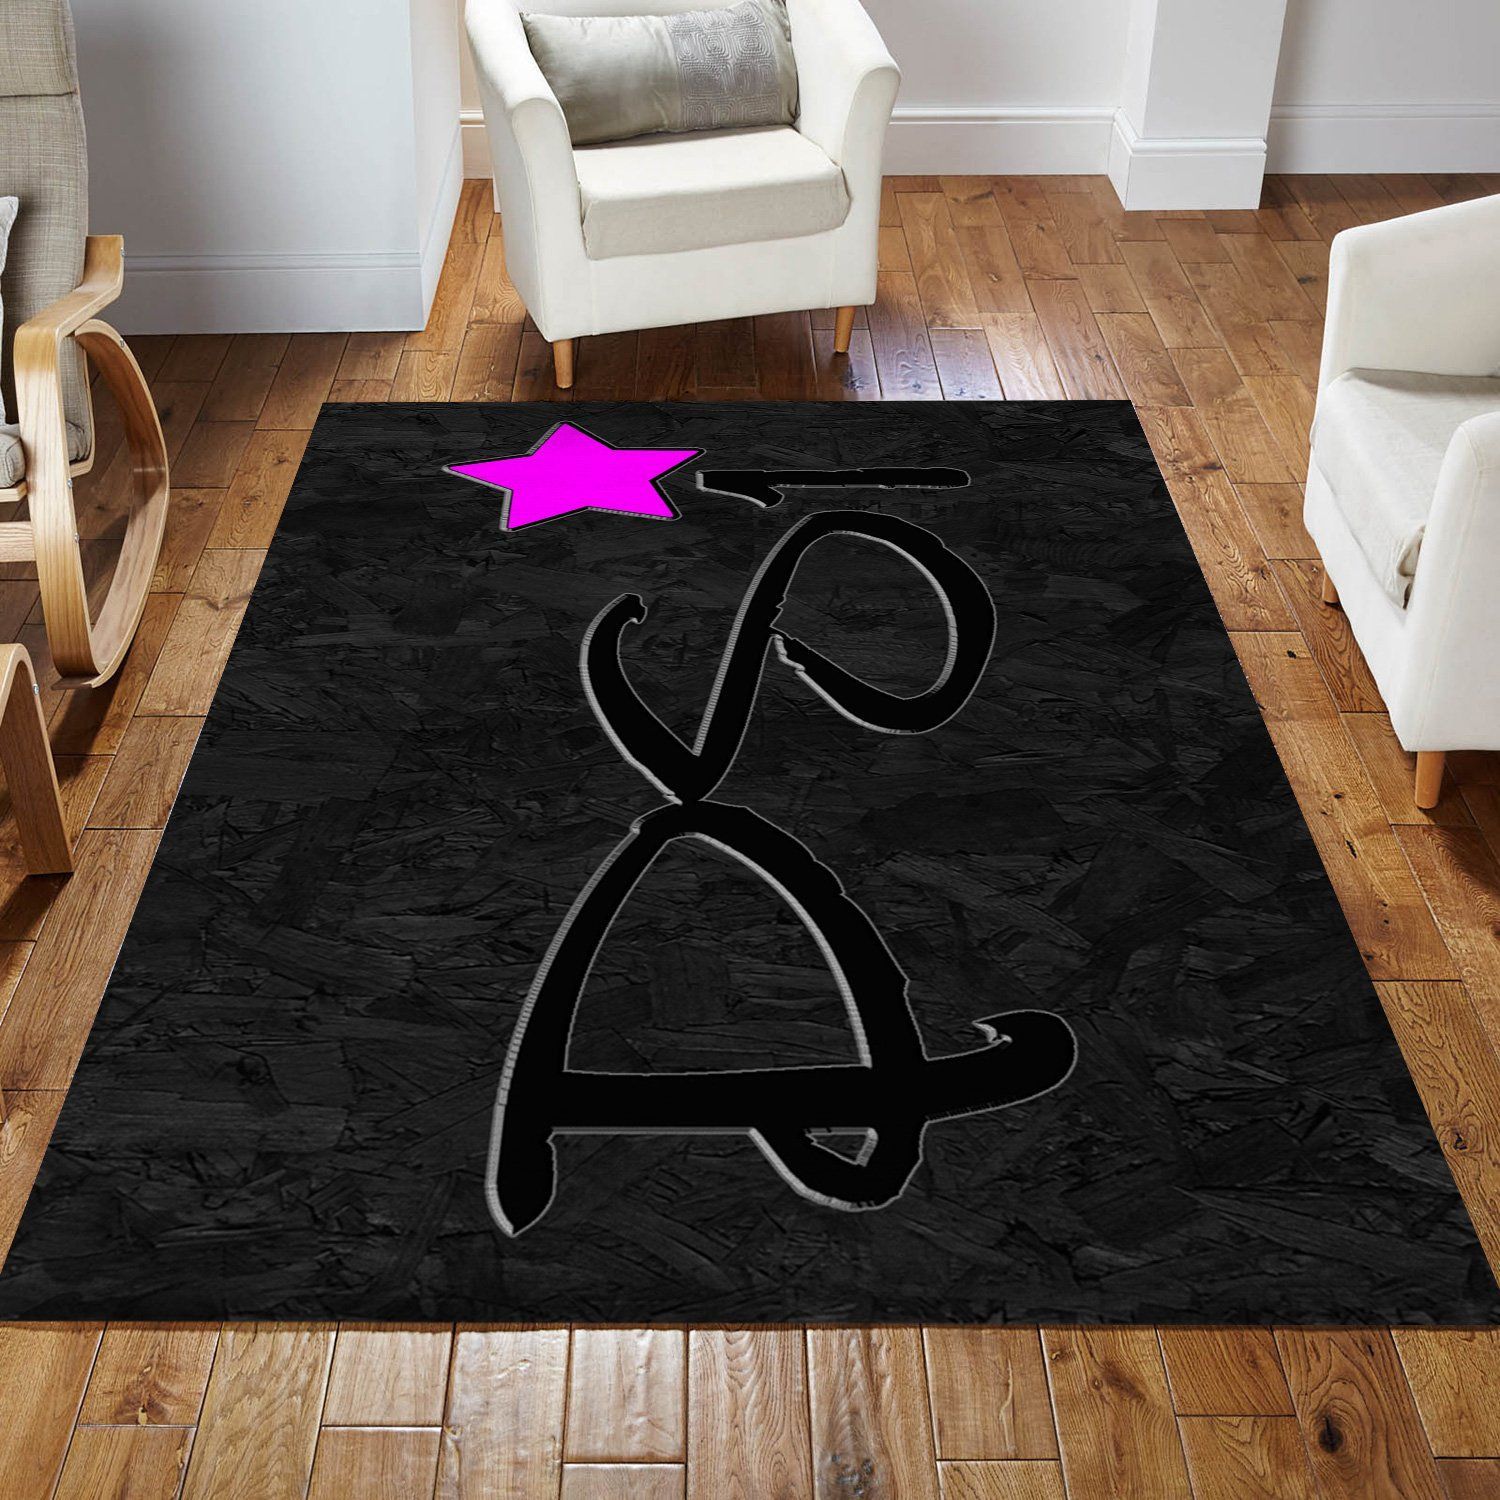 Psi Audio Ver1 Area Rug For Christmas Living Room Rug Home US Decor - Indoor Outdoor Rugs 3